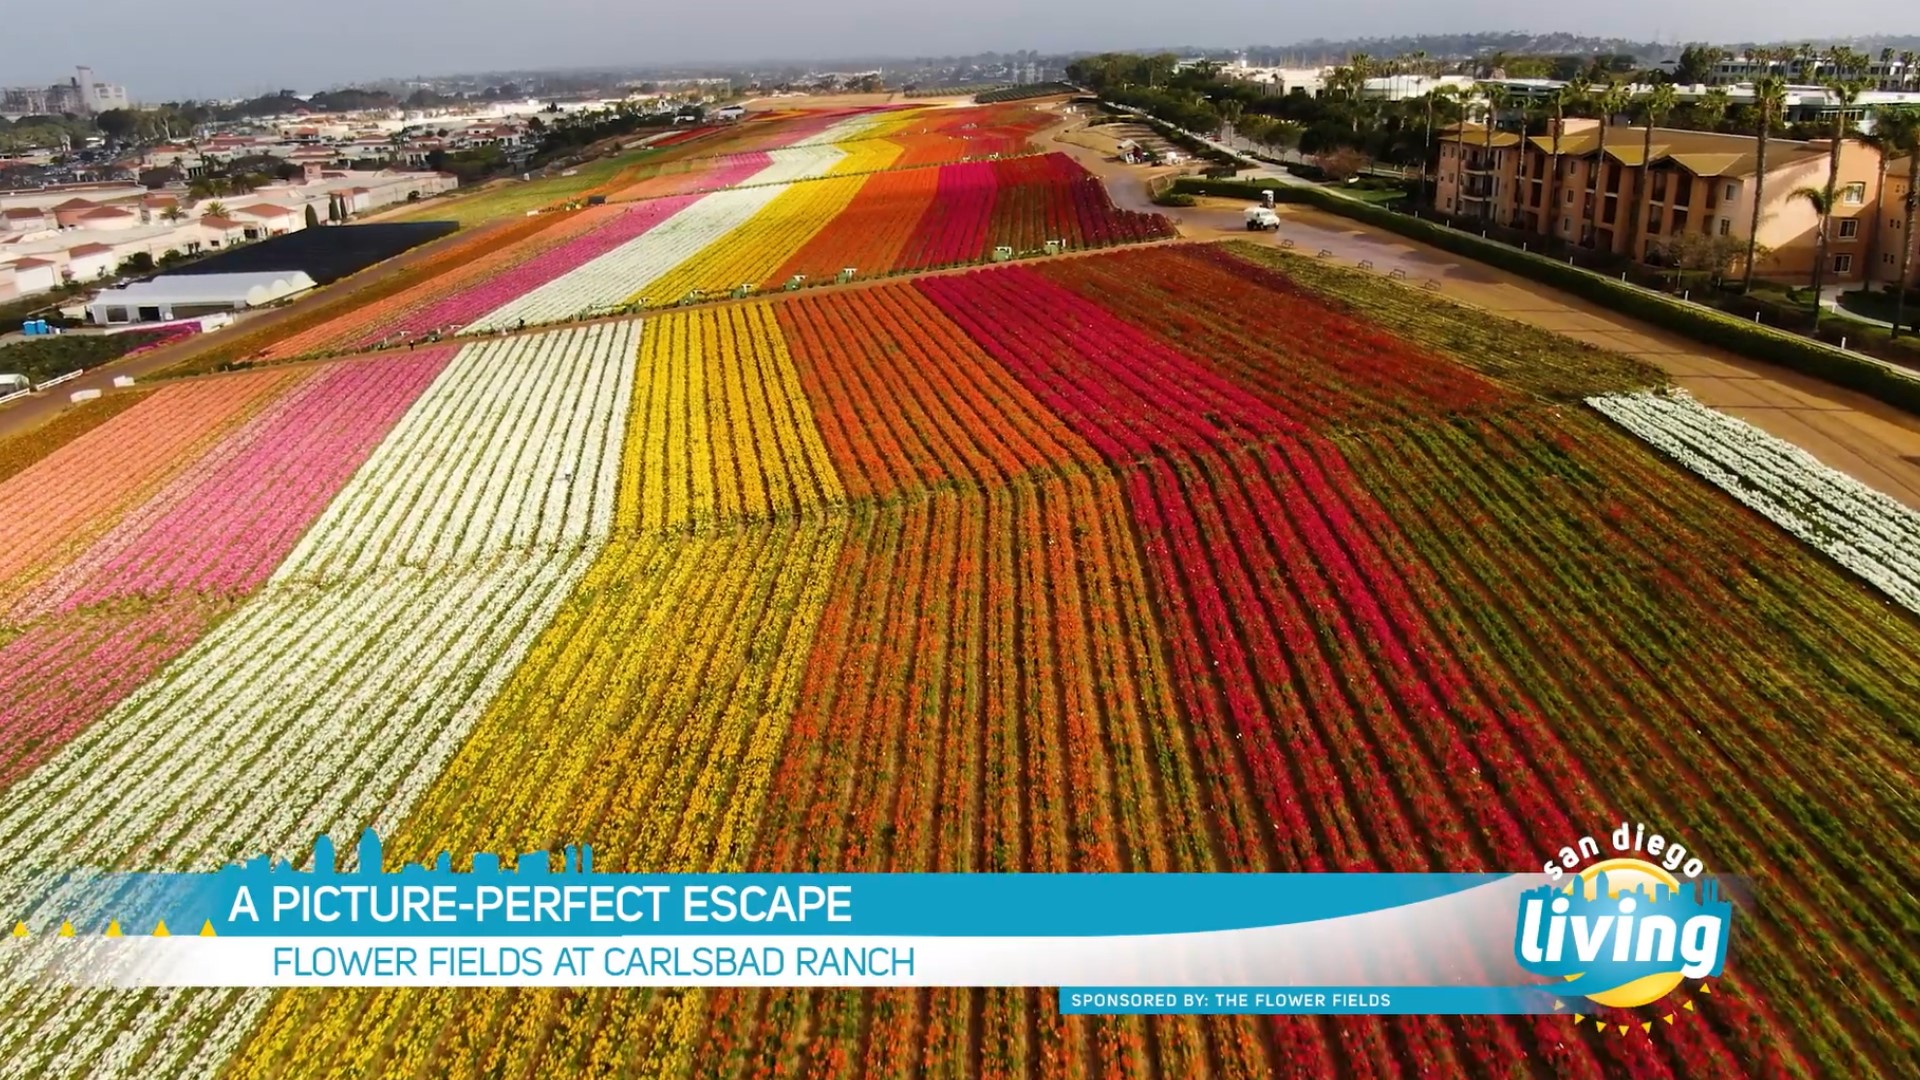 Recent Weather Fueled Unprecedented Spectacular Display. Sponsored by The Flower Fields